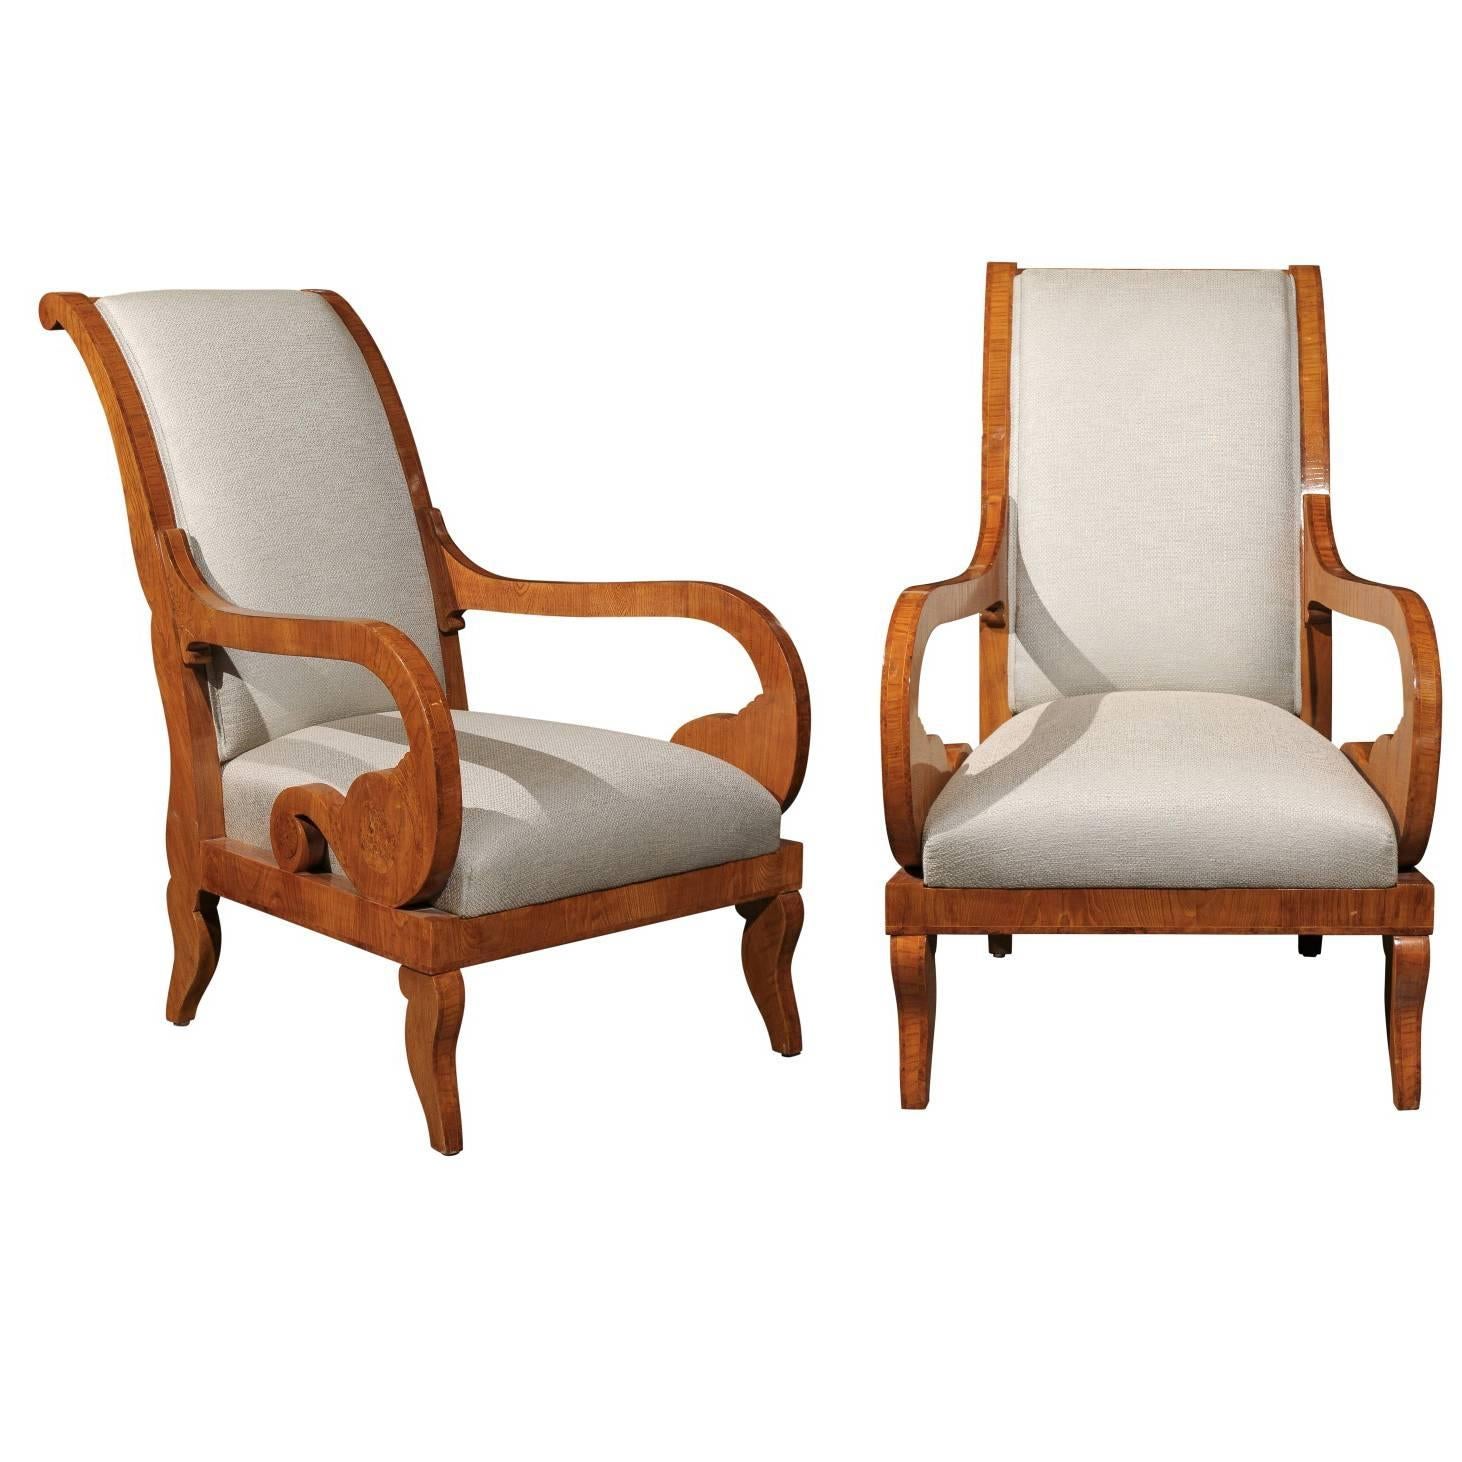 Pair of Biedermeier Mid 19th Century Austrian Armchairs with Scrolled Arms For Sale